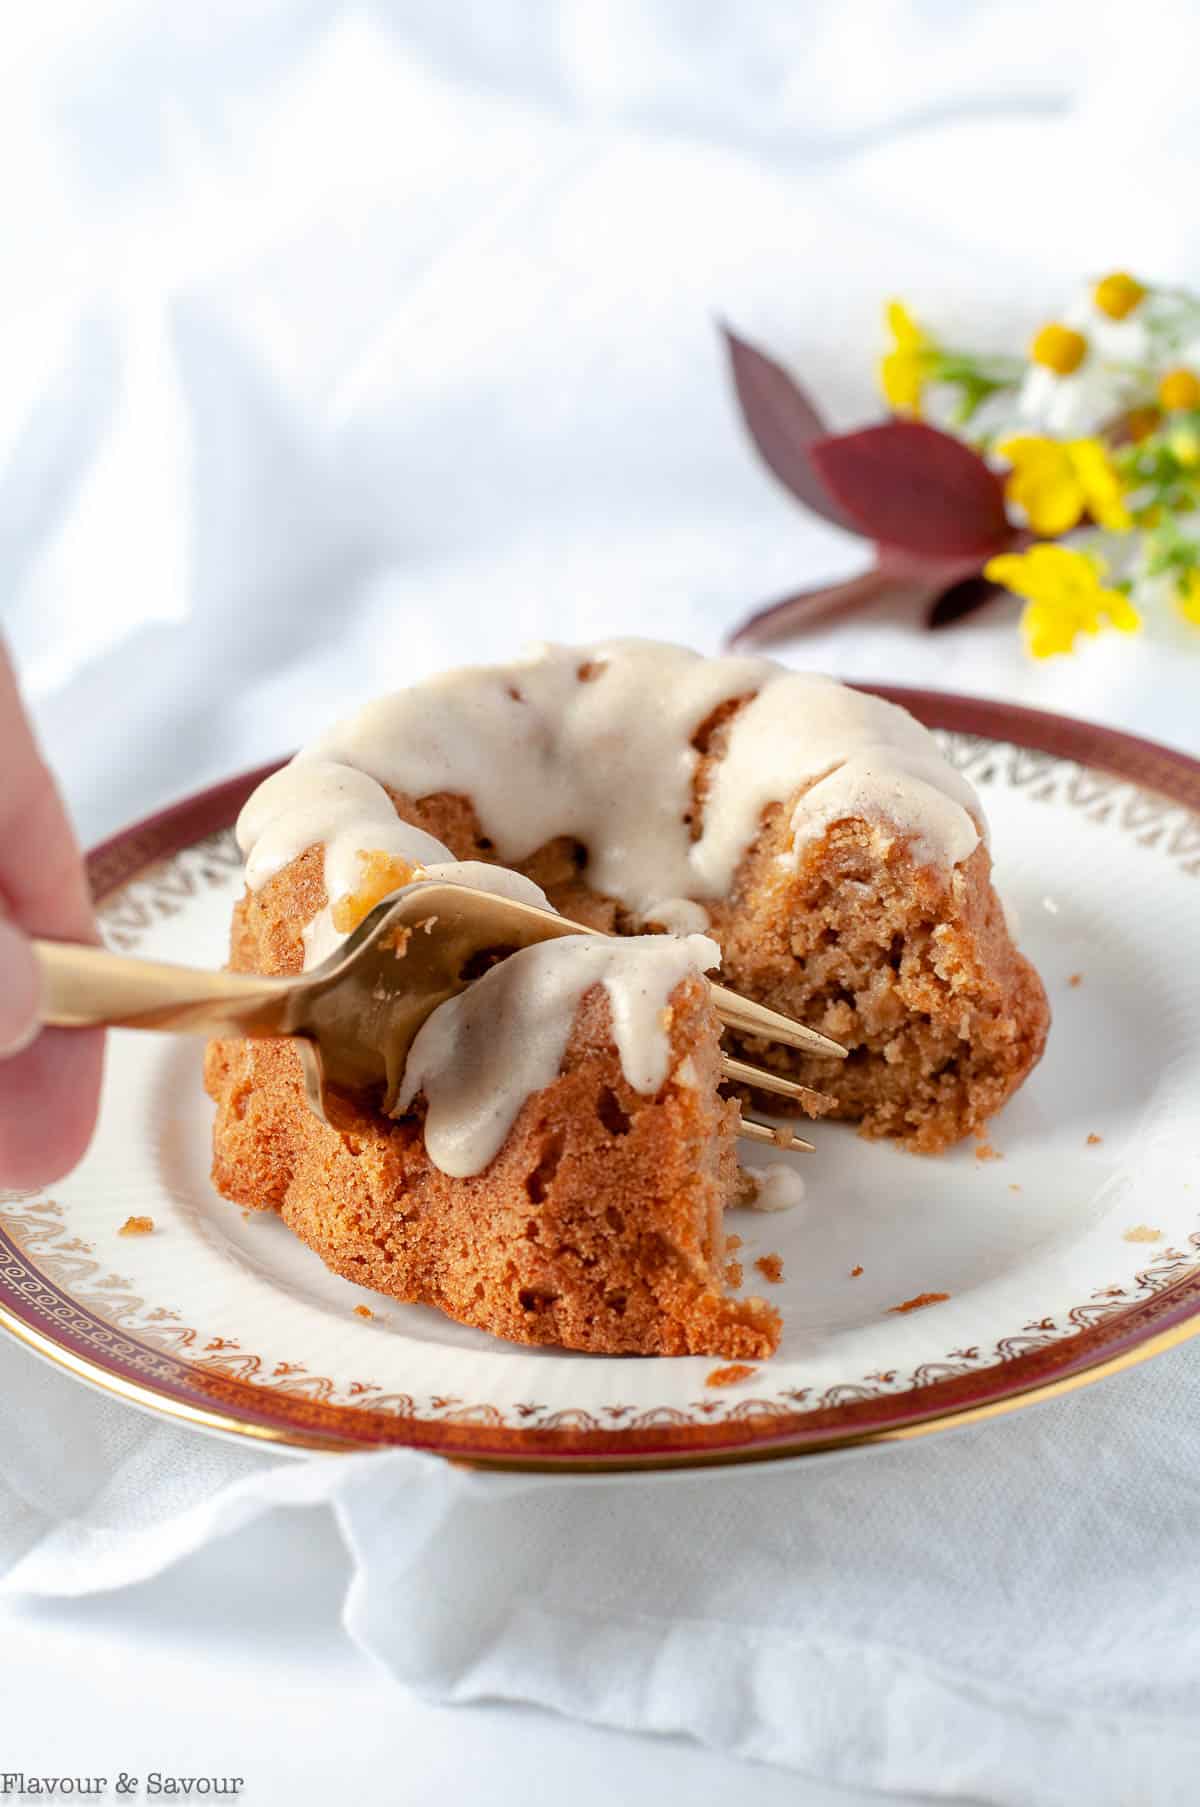 Cutting into a Mni Apple Bundt Cake with a fork